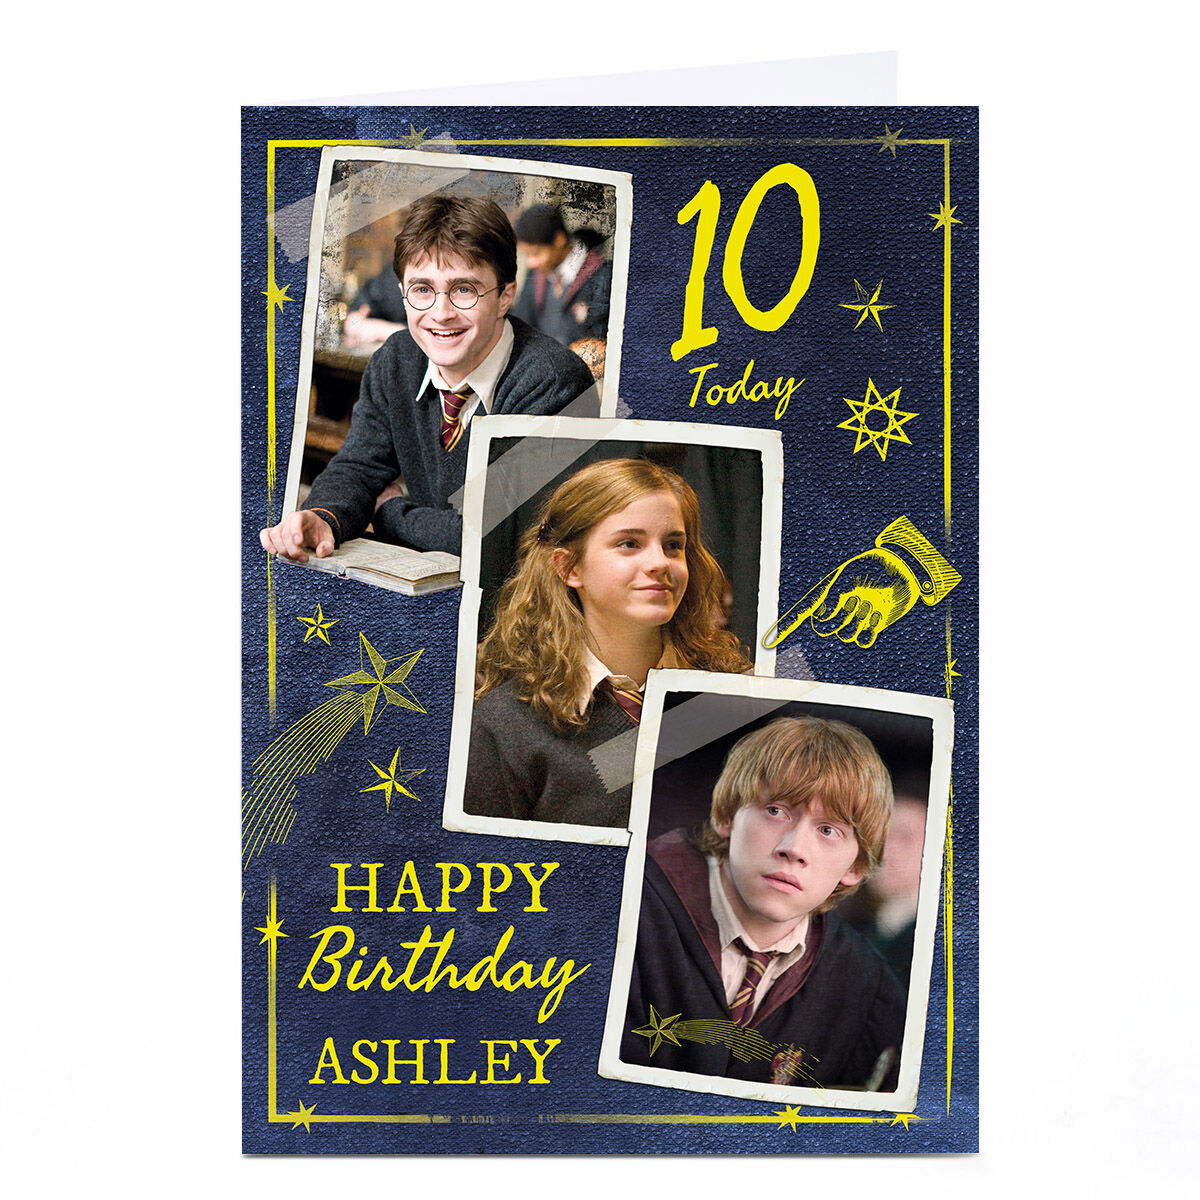 The Bookmark - Happy birthday Harry! ⚡️ #GIVEAWAY - Today we are  celebrating Harry Potter's birthday! To celebrate, we are hosting a special  giveaway with our friends from Naturalstylepr. To participate, answer